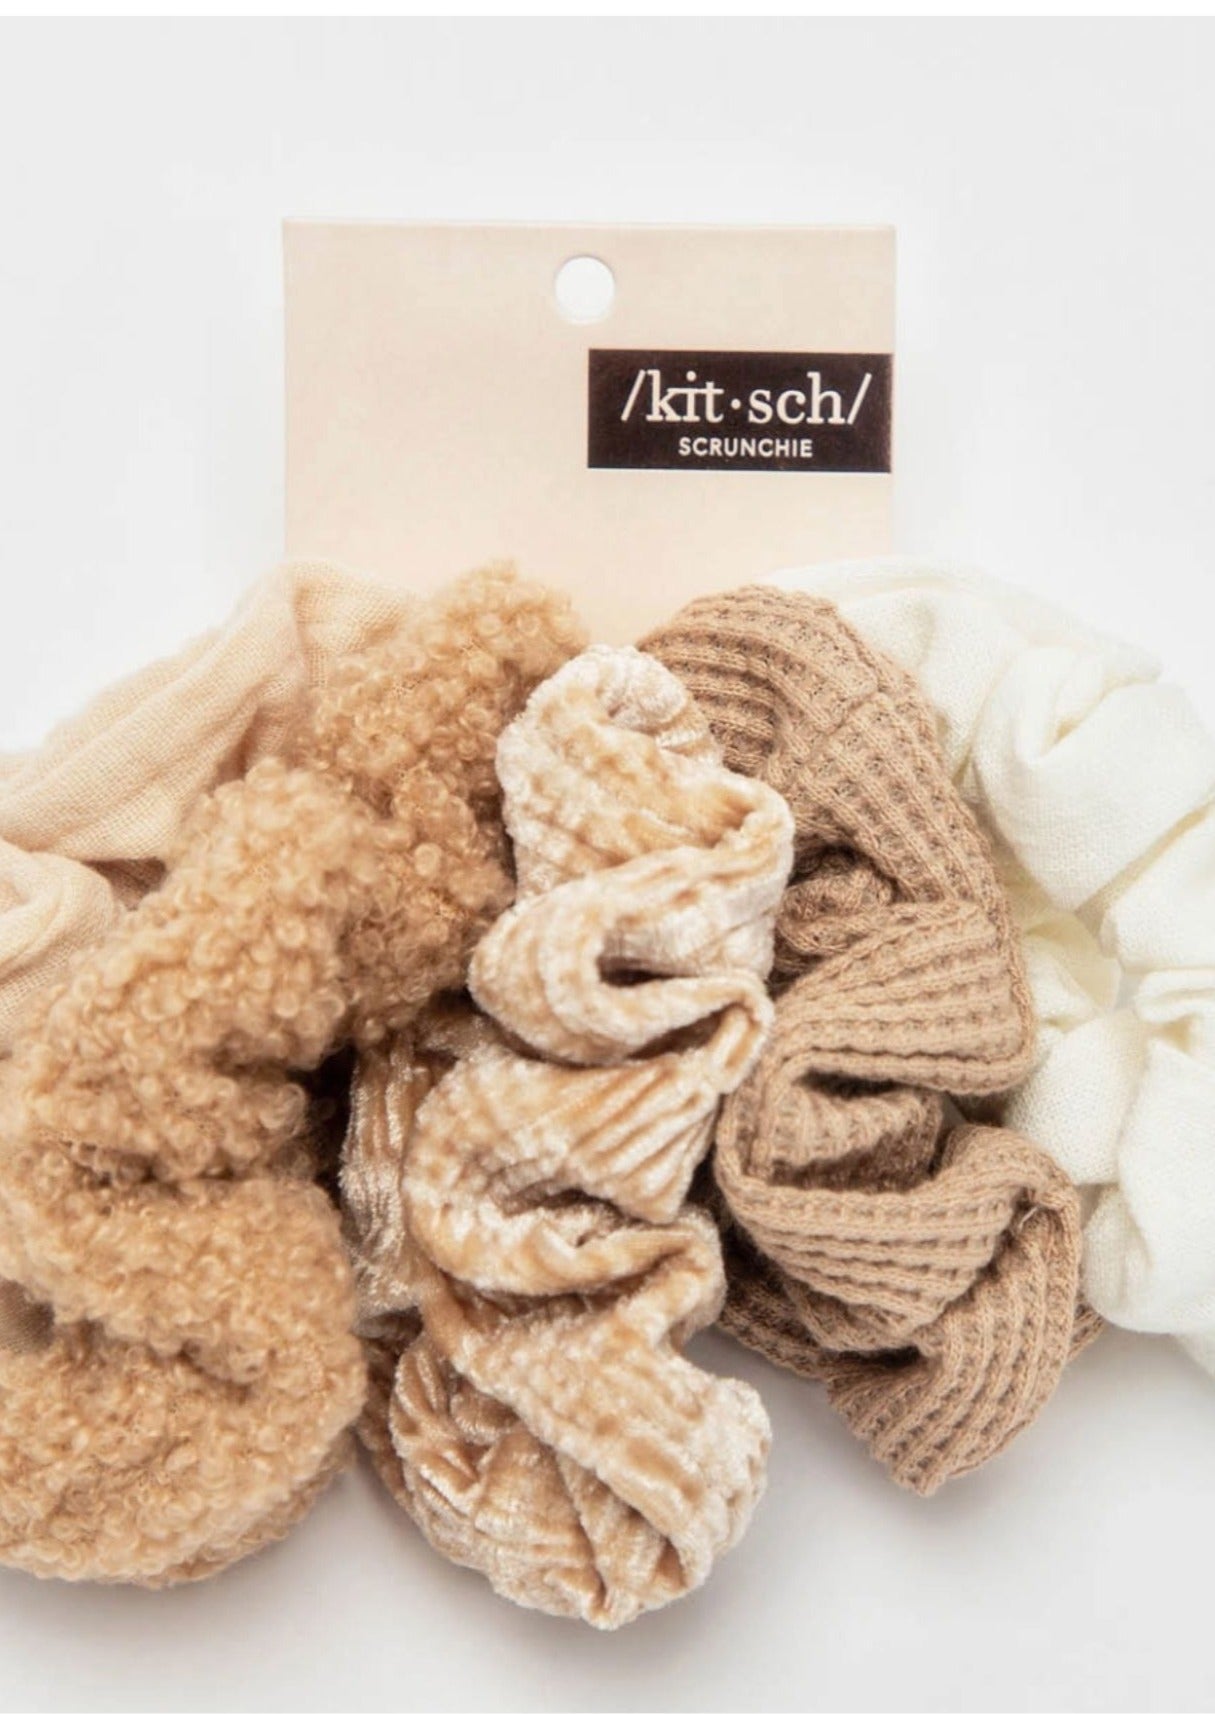 OLD LISTING - Textured Scrunchie 5 Pack -FINAL SALE Accessories